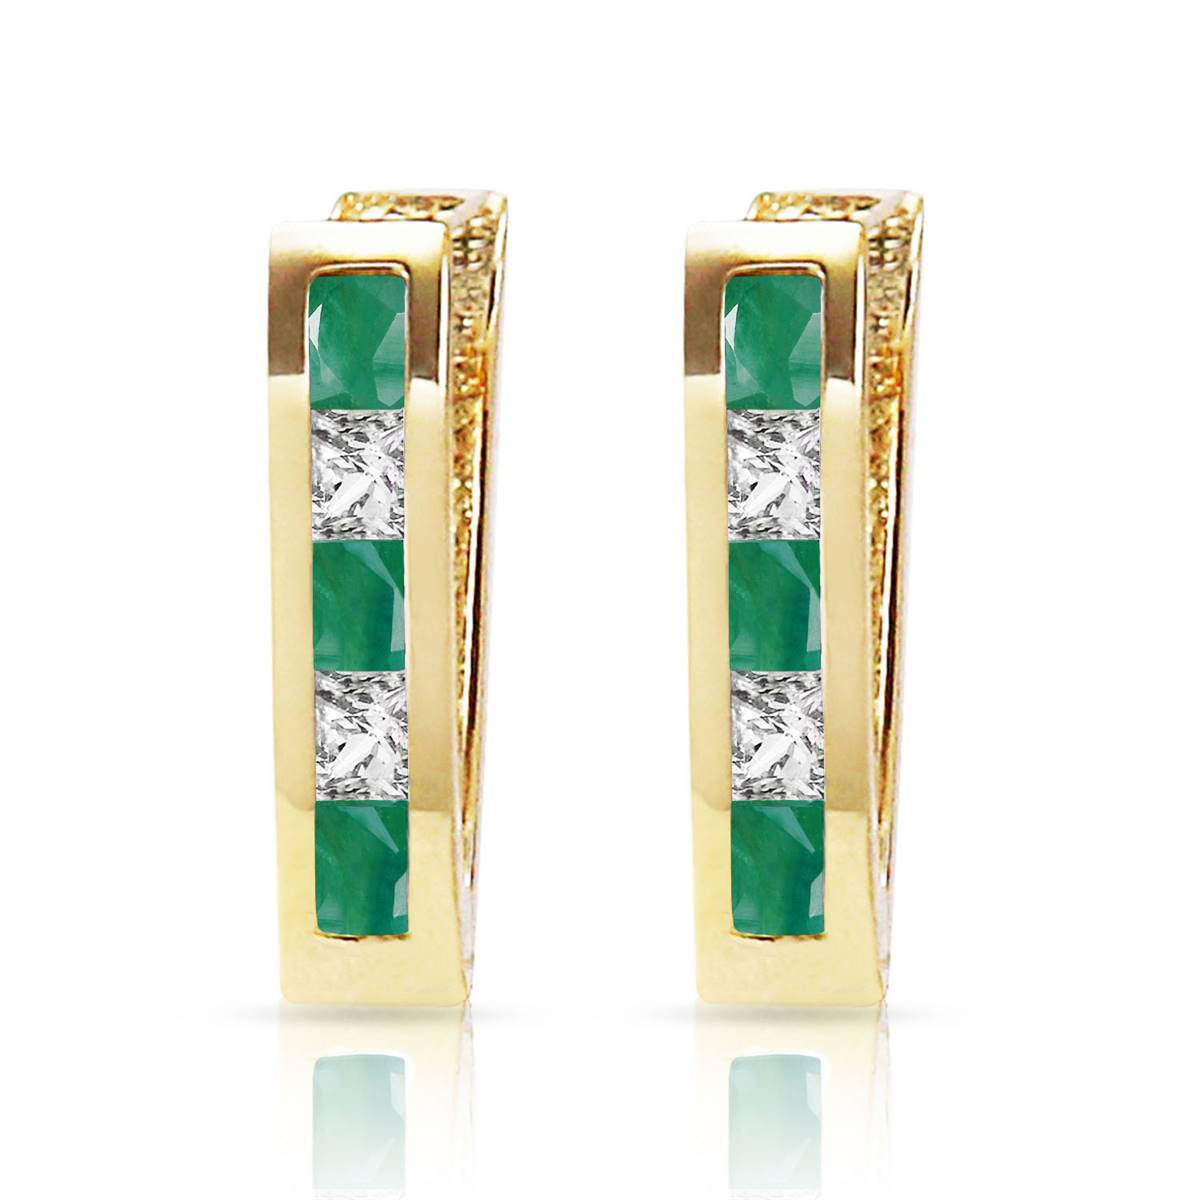 1.26 Carat 14K Solid Yellow Gold Italia Emerald Whote Topaz Earrings